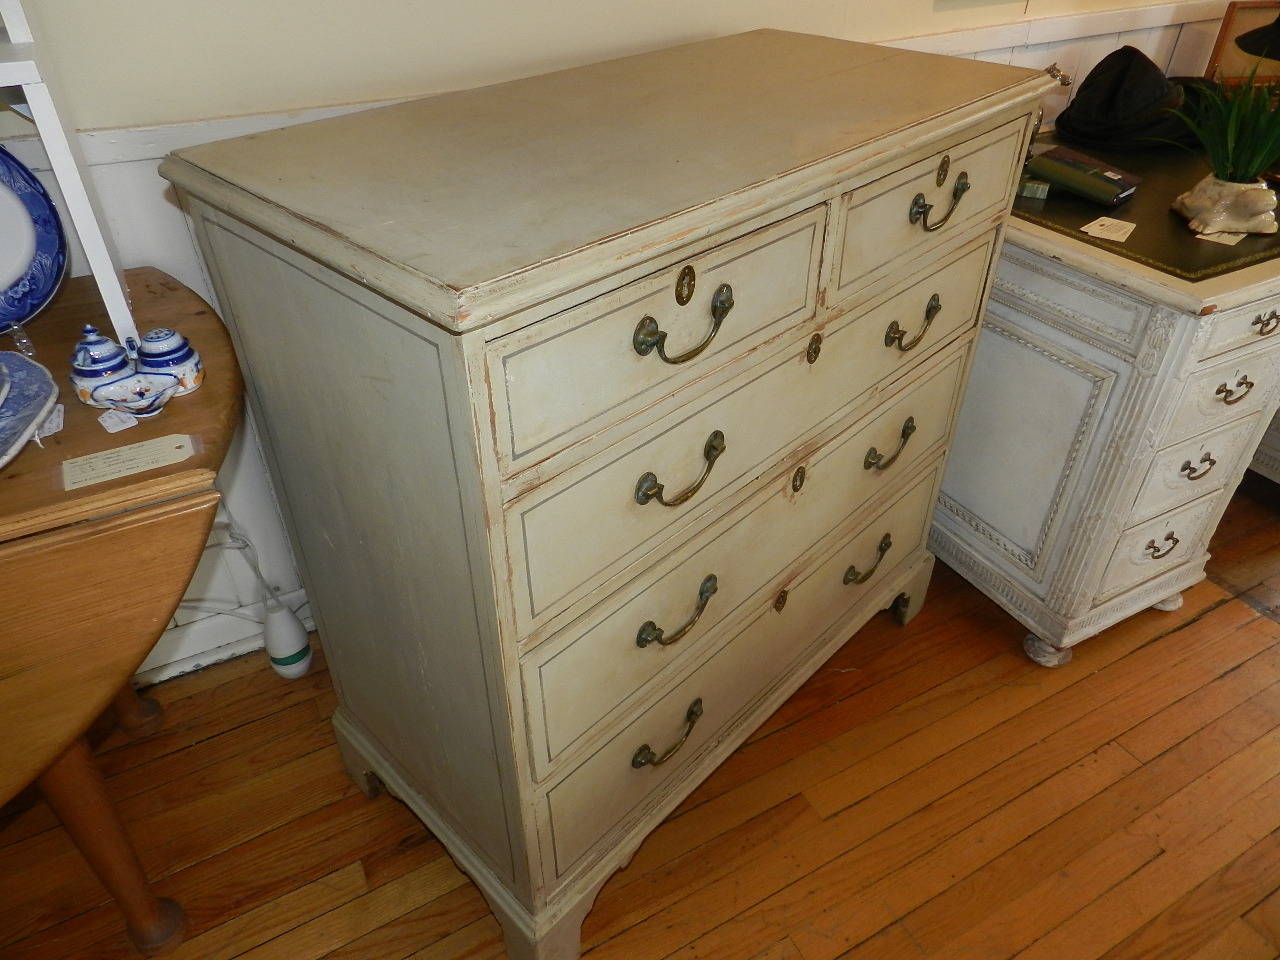 Antique pine chest of drawers with antique brass handles and bracket feet. The paint finish has been restored.